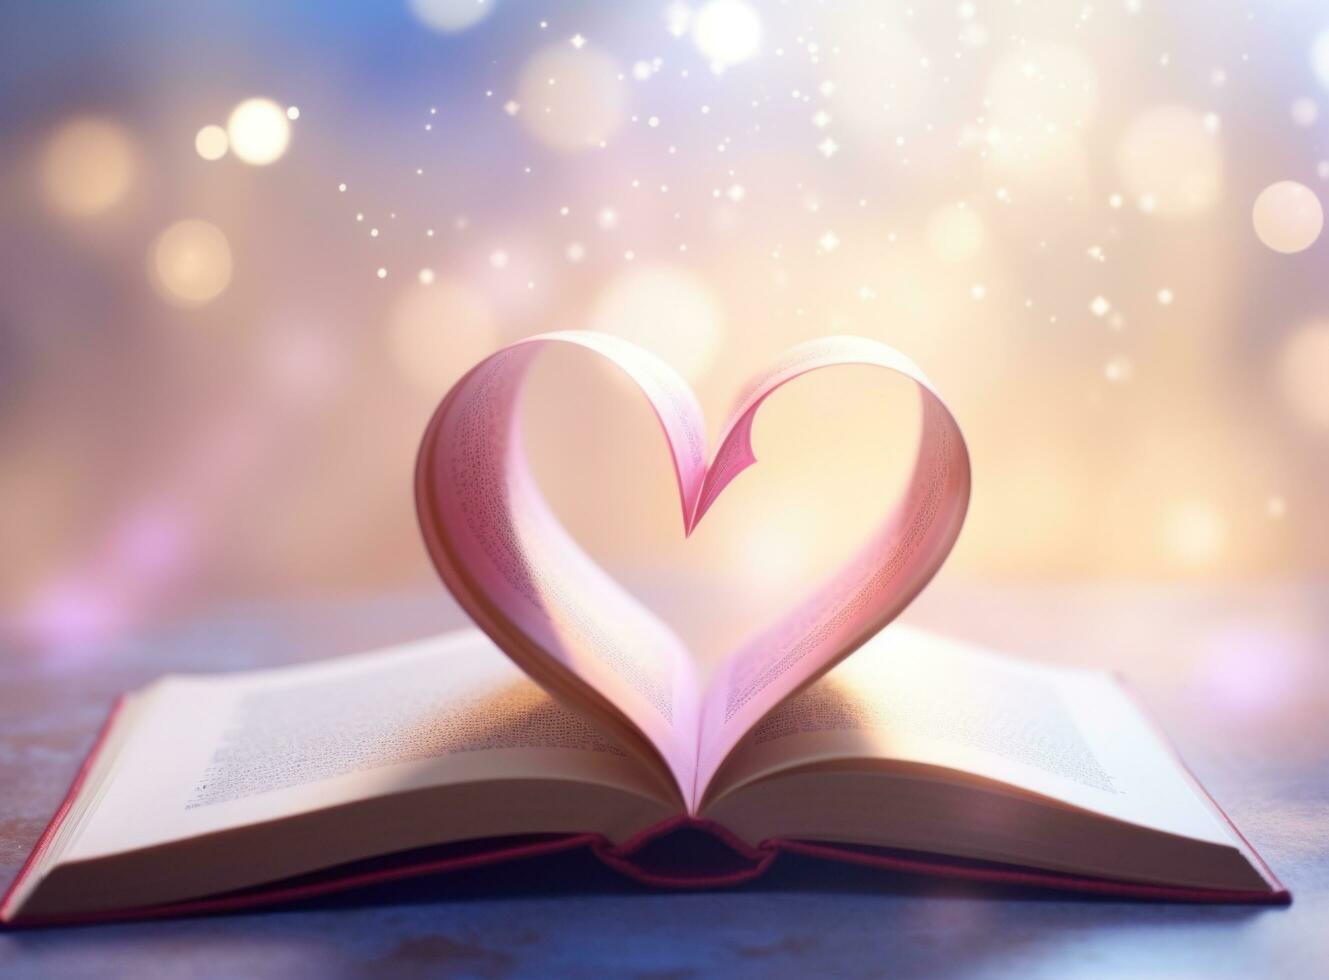 AI generated an open book shaped like a heart against the light of the background photo